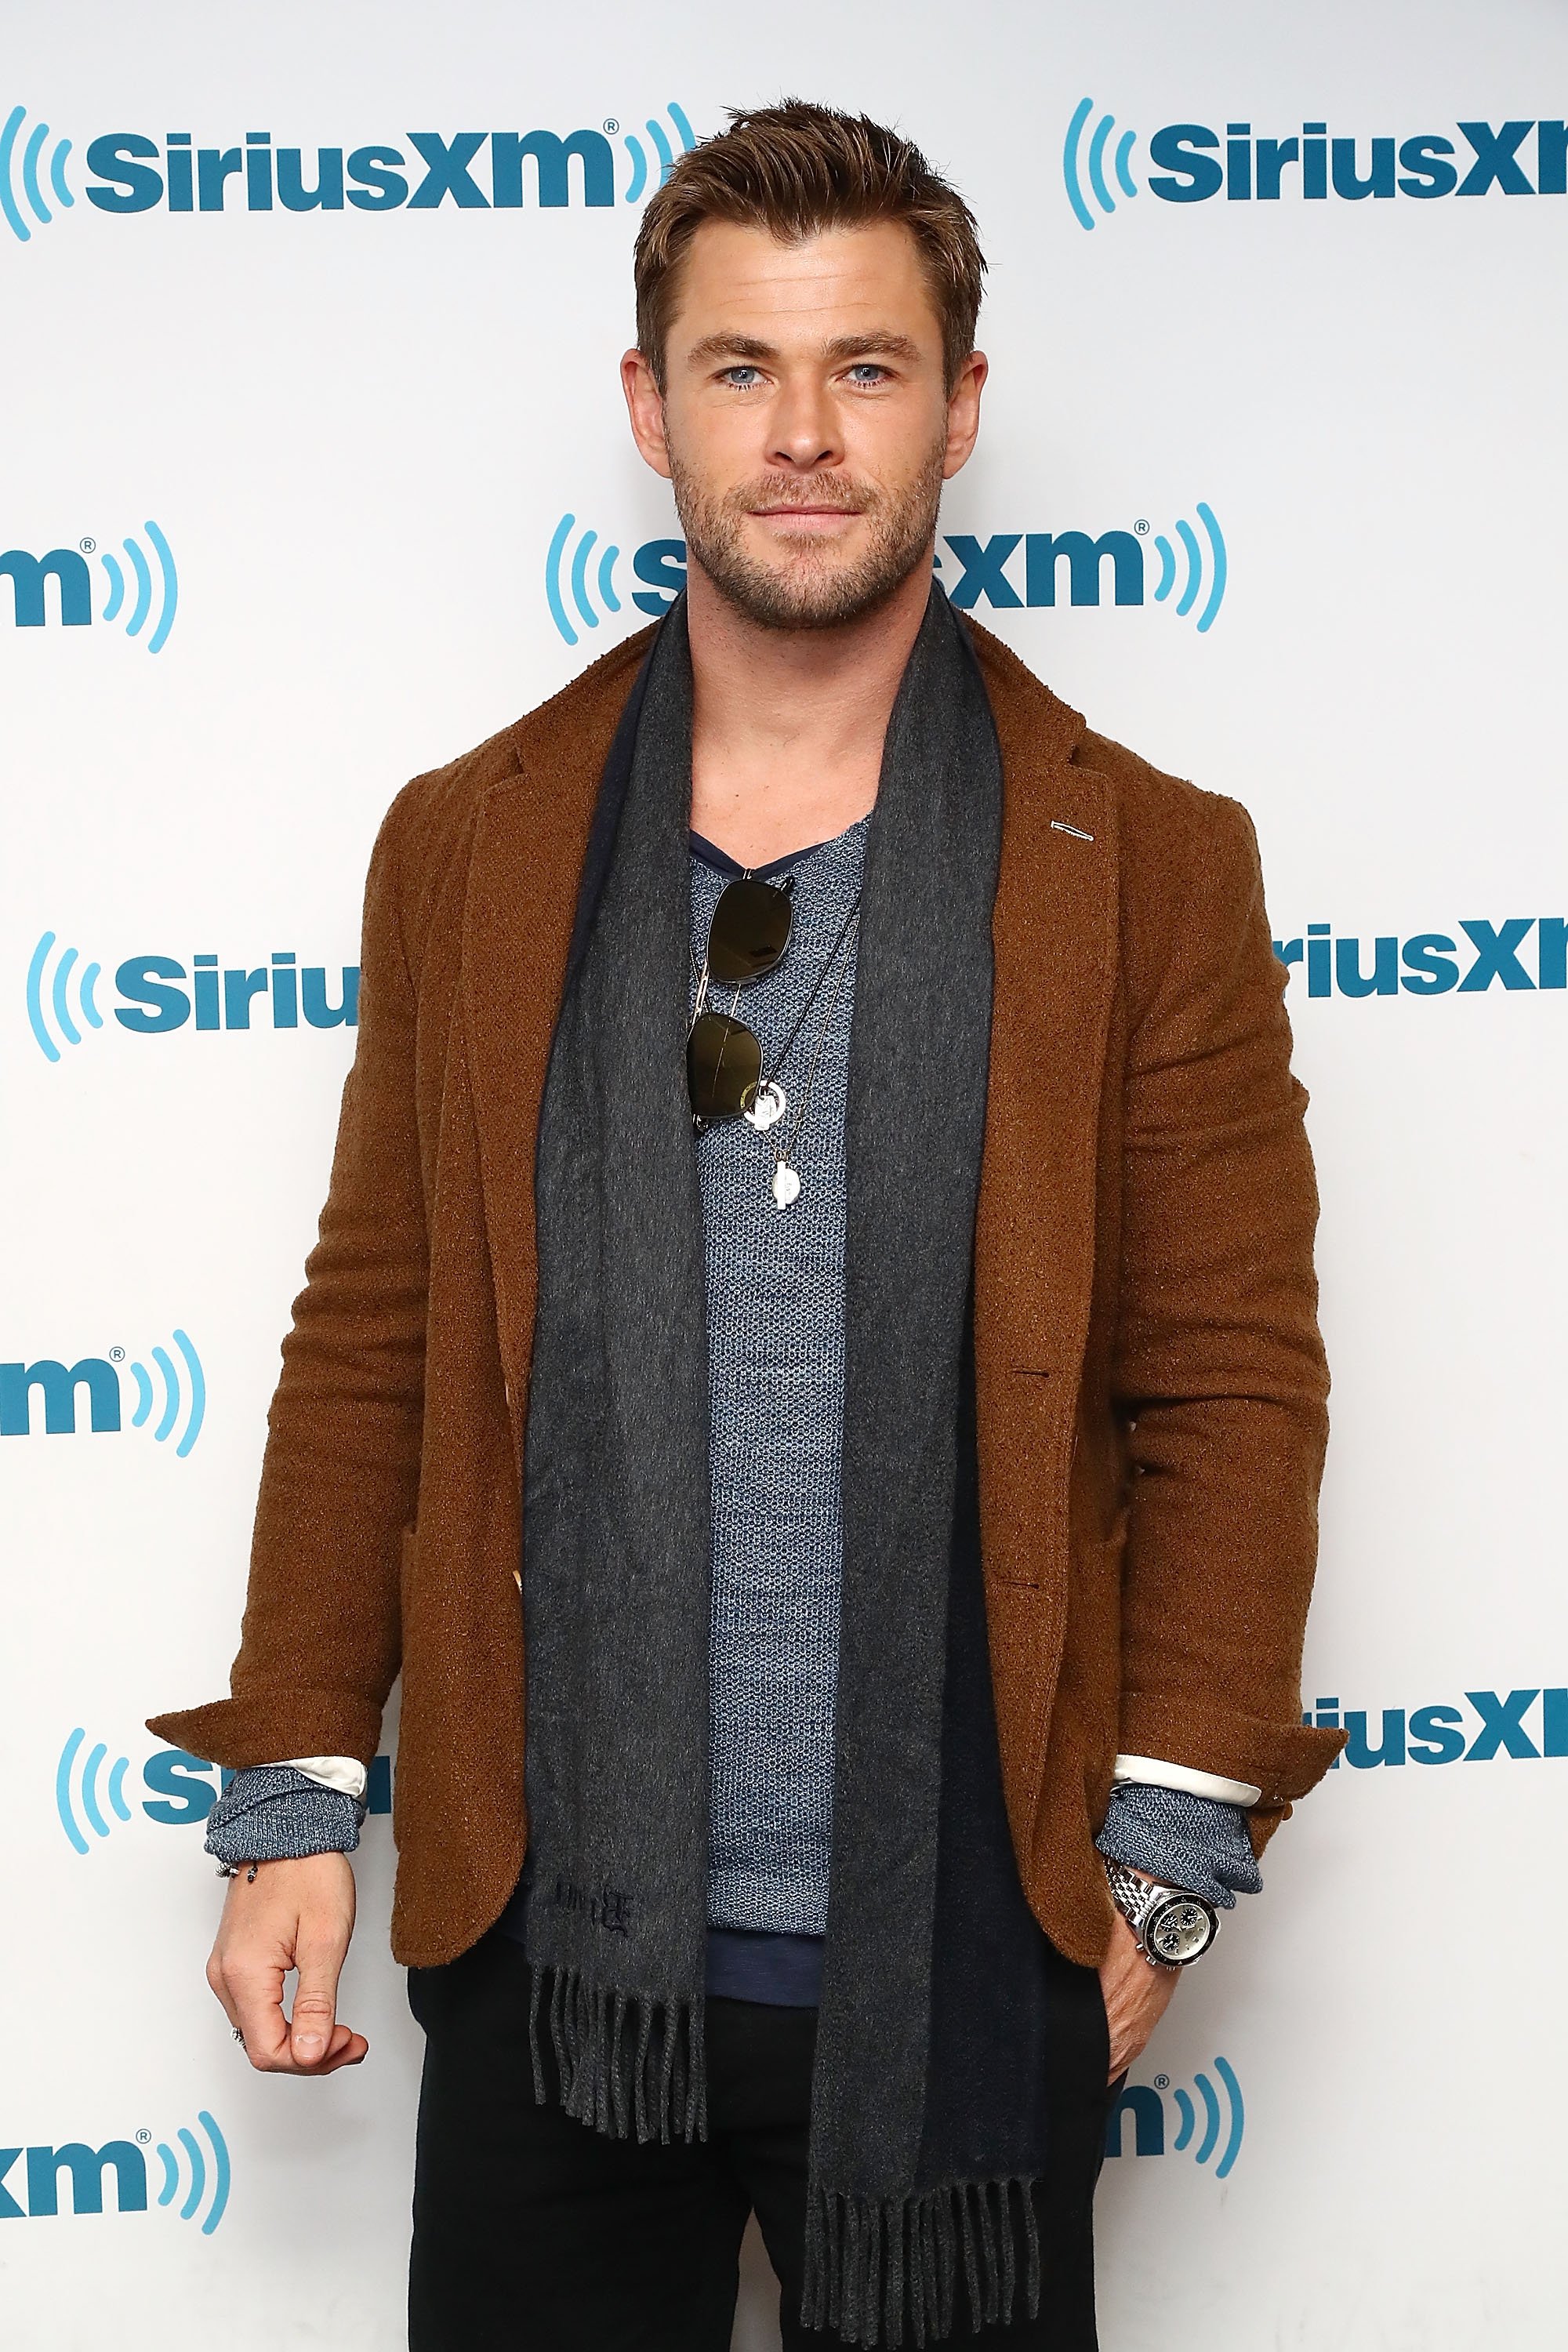 Chris Hemsworth visits the SiriusXM studios on January 16, 2018 in New York City | Photo: Getty Images